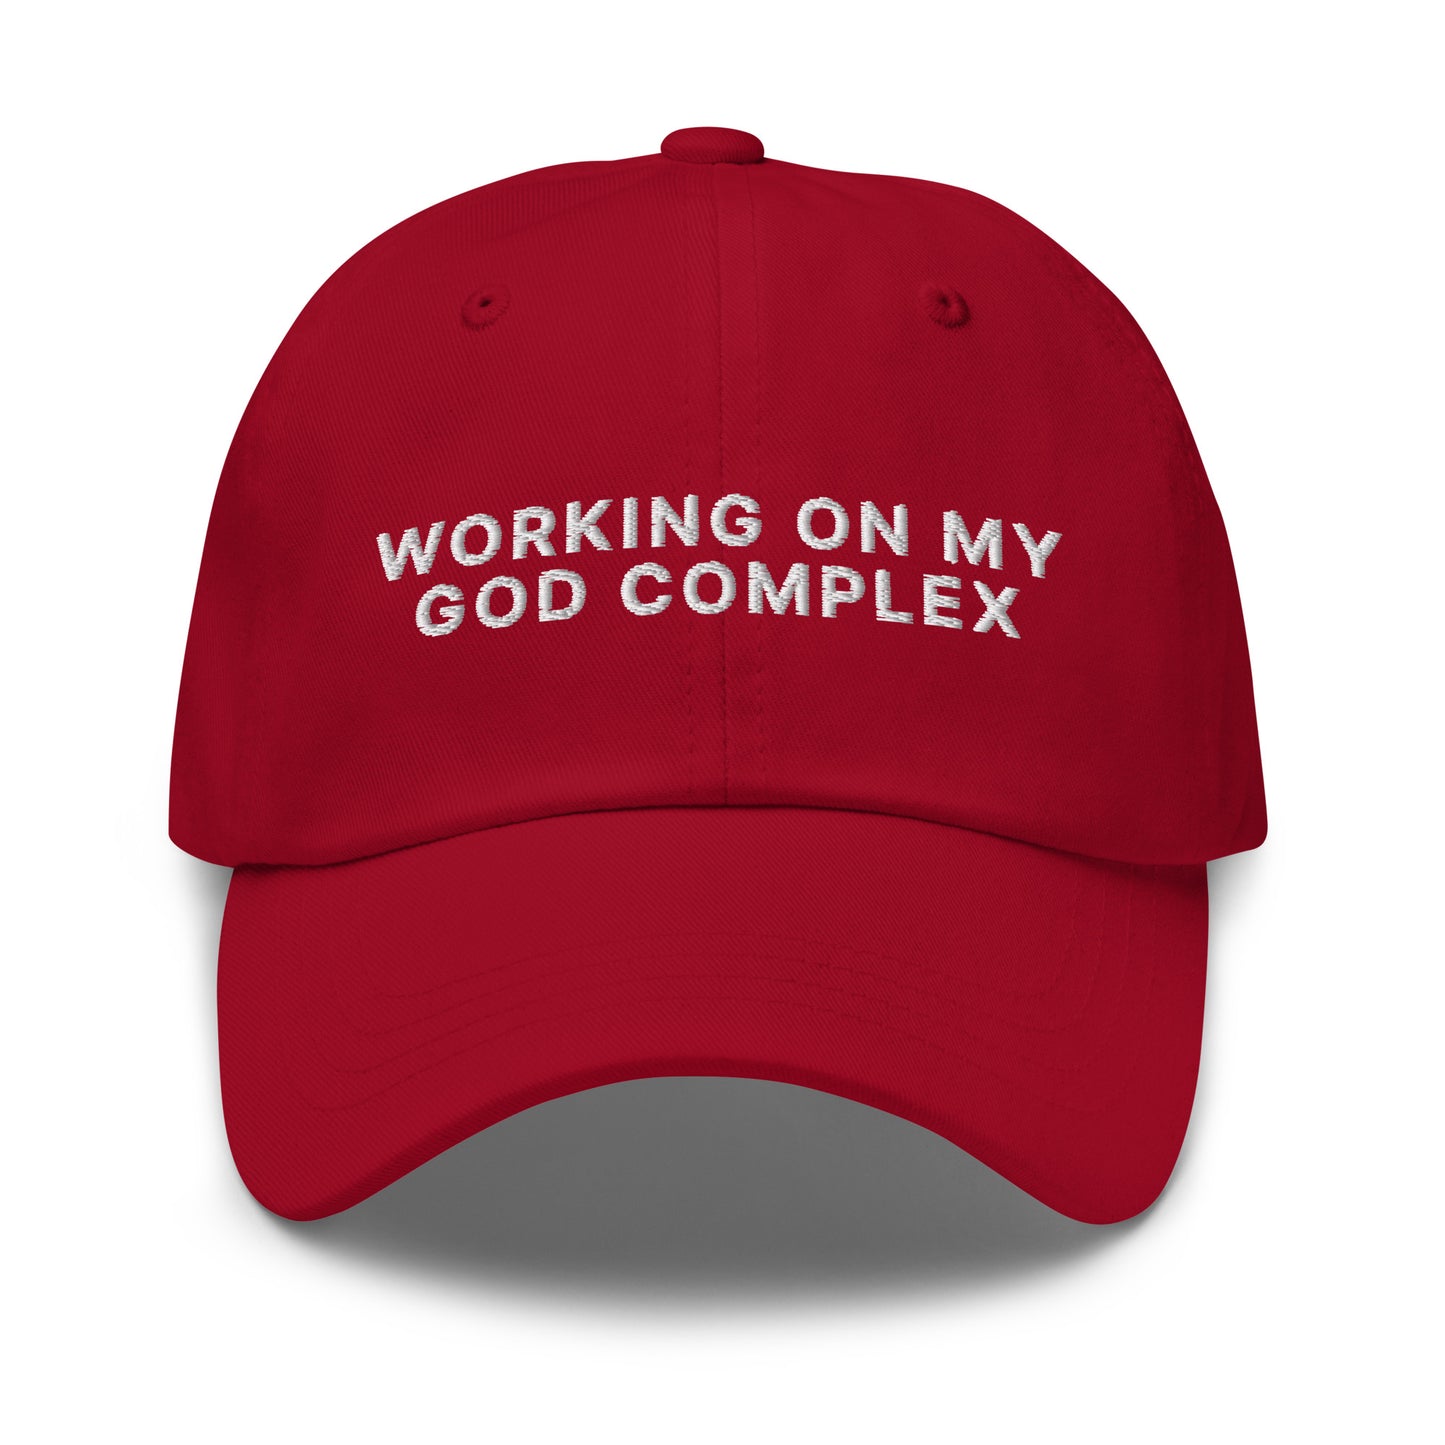 Working On My God Complex hat